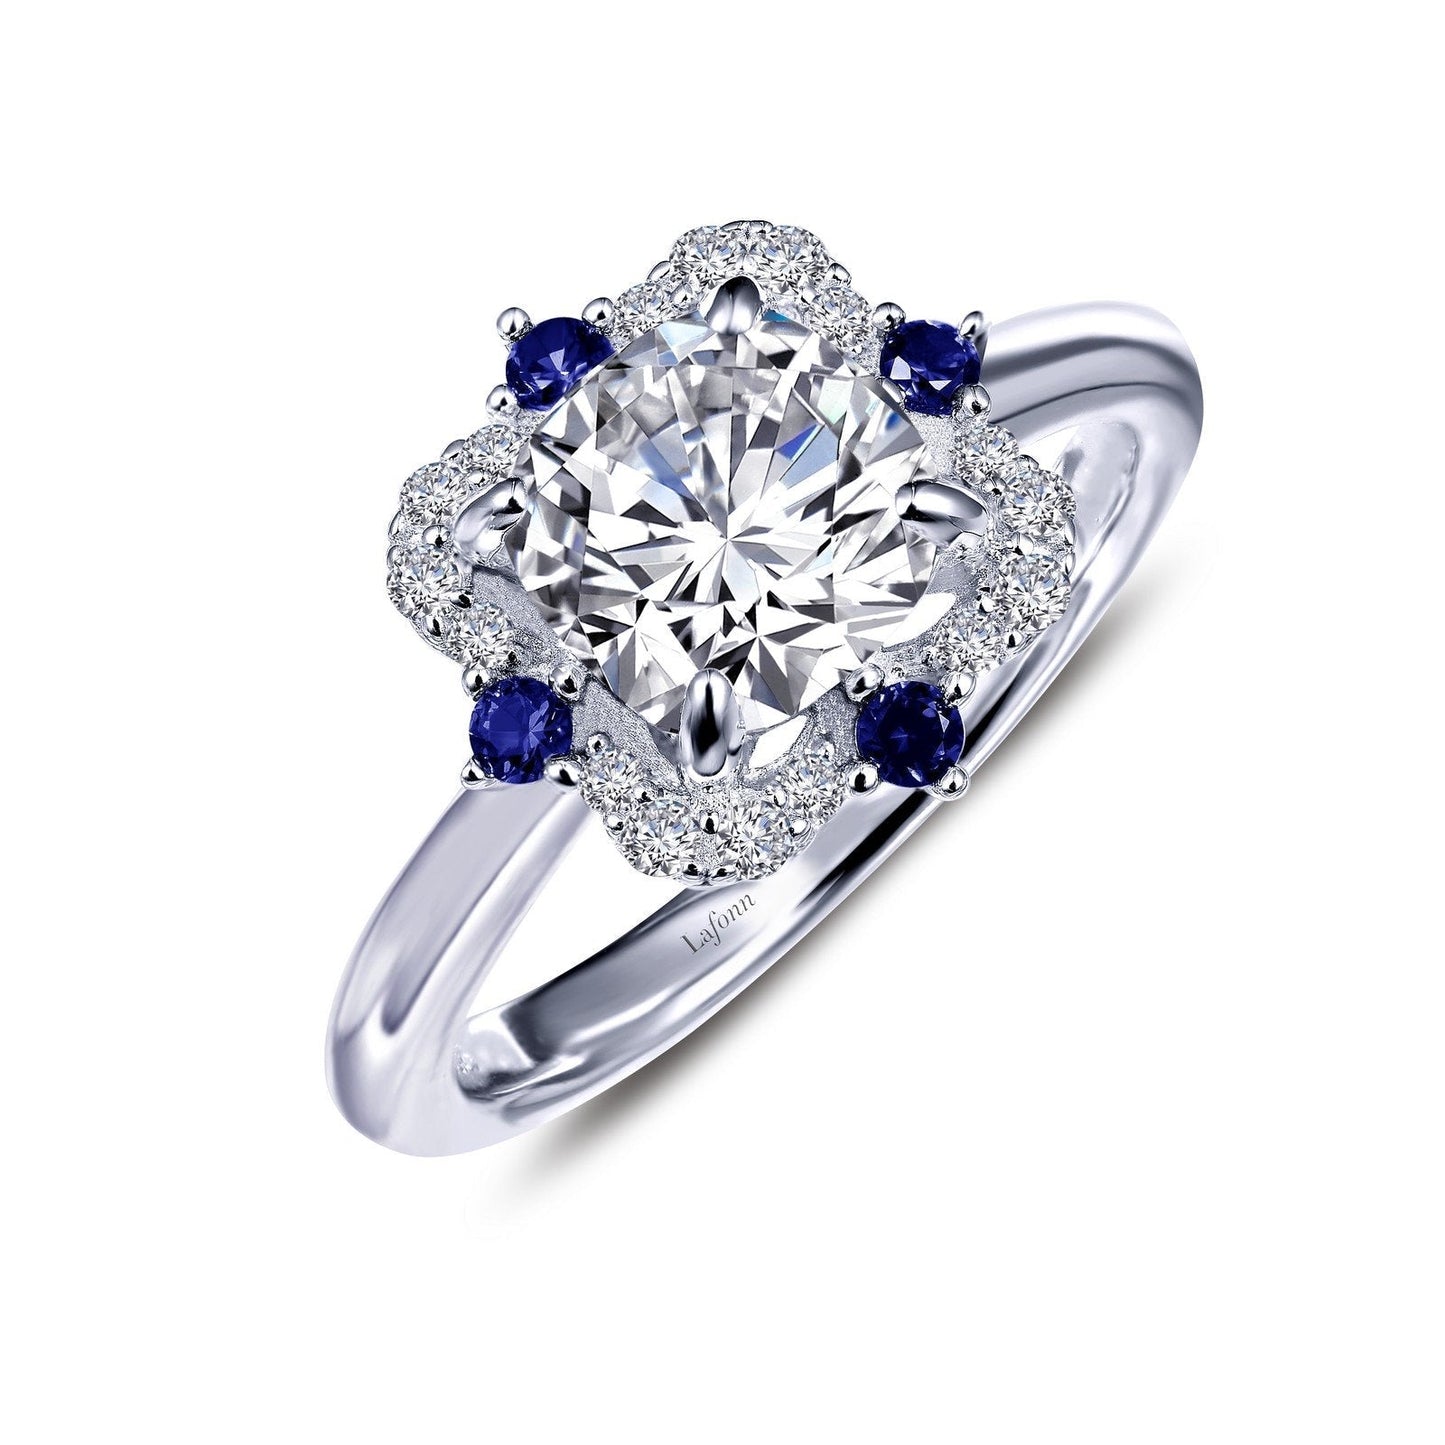 Lafonn Art Deco Inspired Engagement Ring Sapphire RINGS Size 5 Platinum 1.83 CTS 